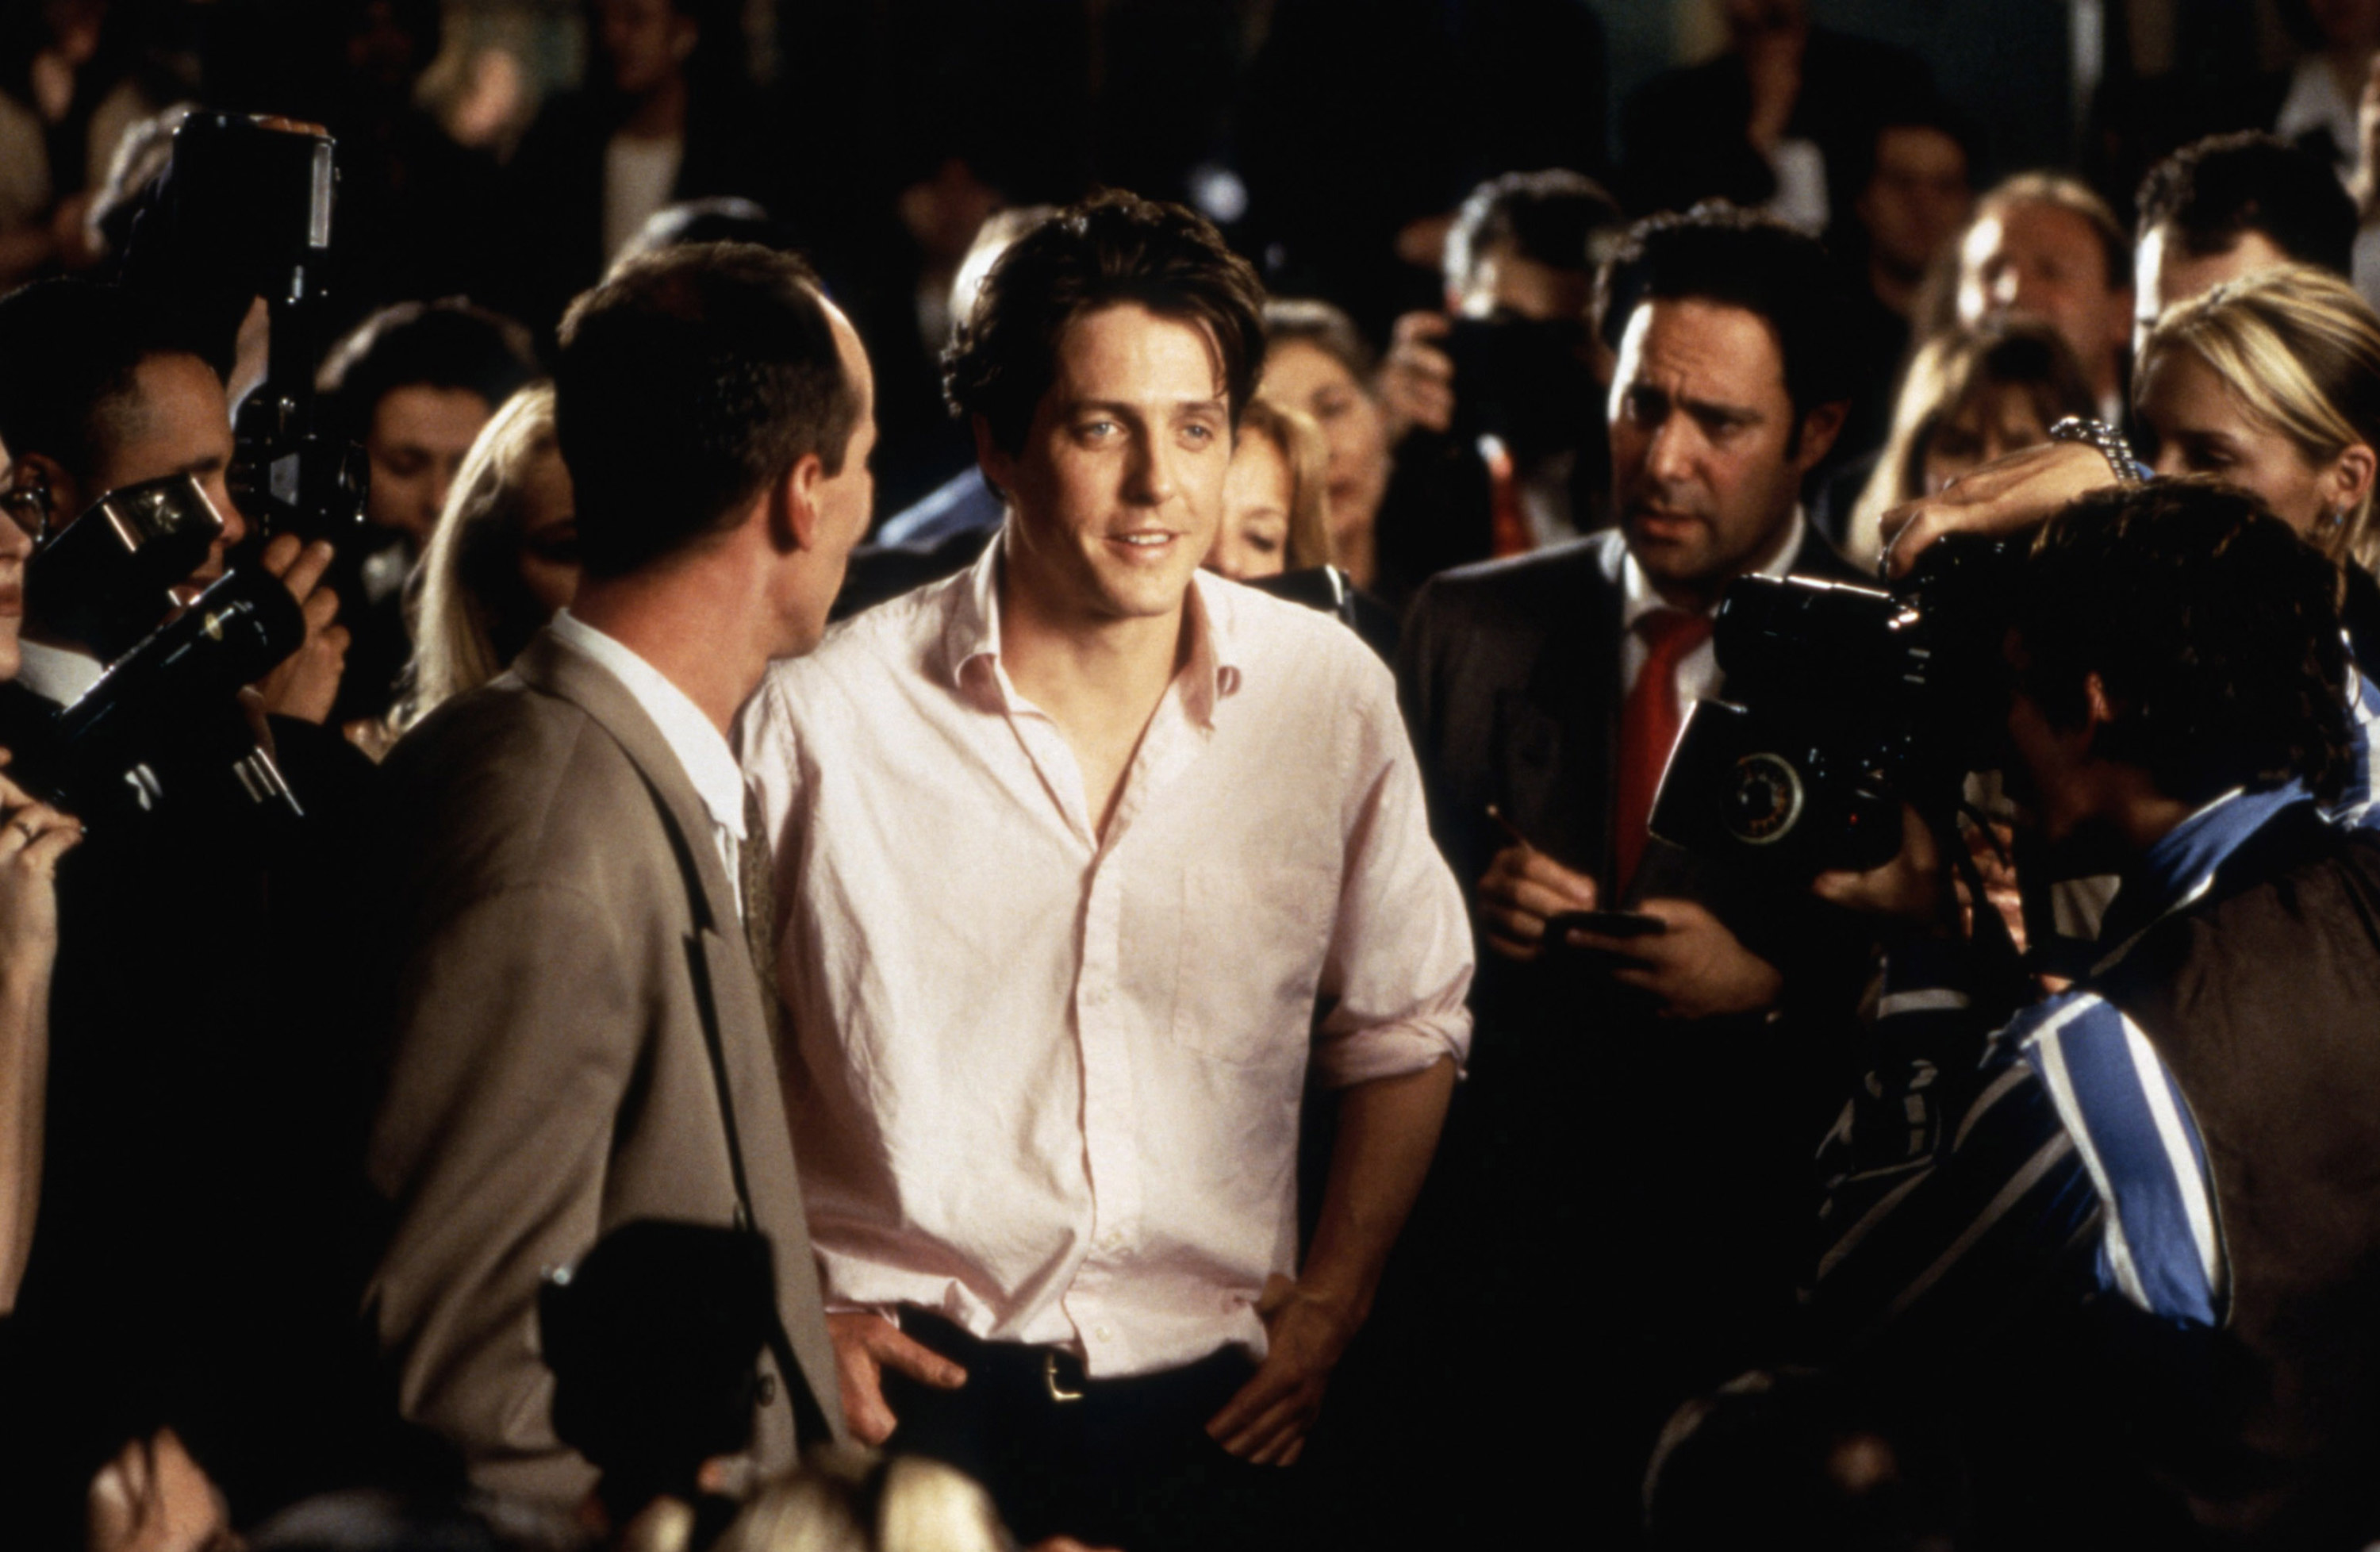 Hugh smiles while surrounded by reporters in a scene from Notting Hill